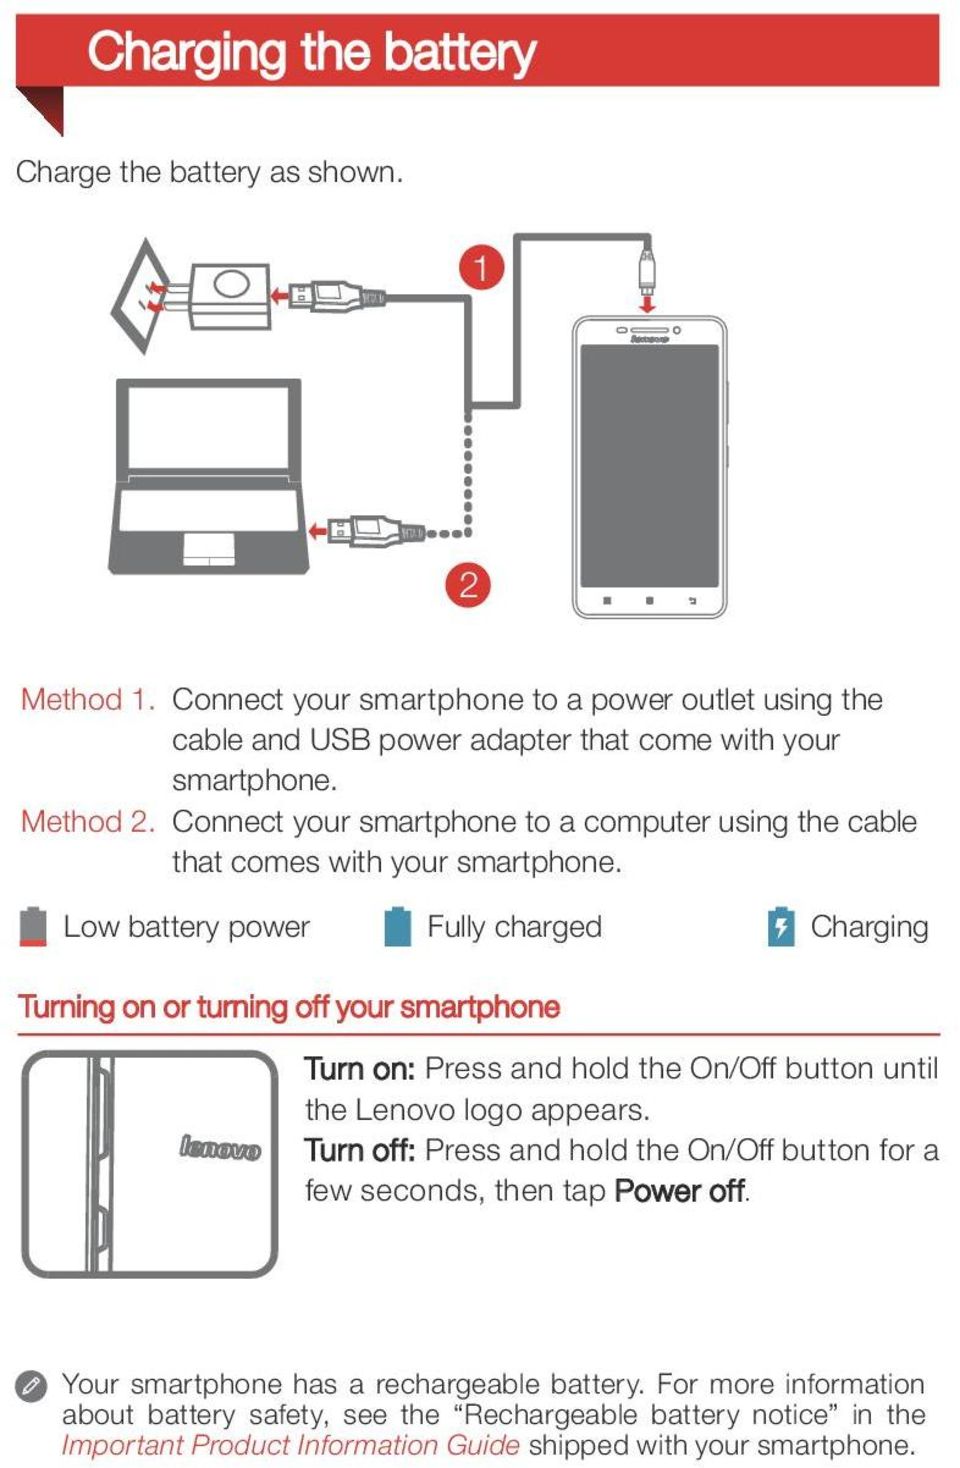 Connect your smartphone to a computer using the cable that comes with your smartphone.